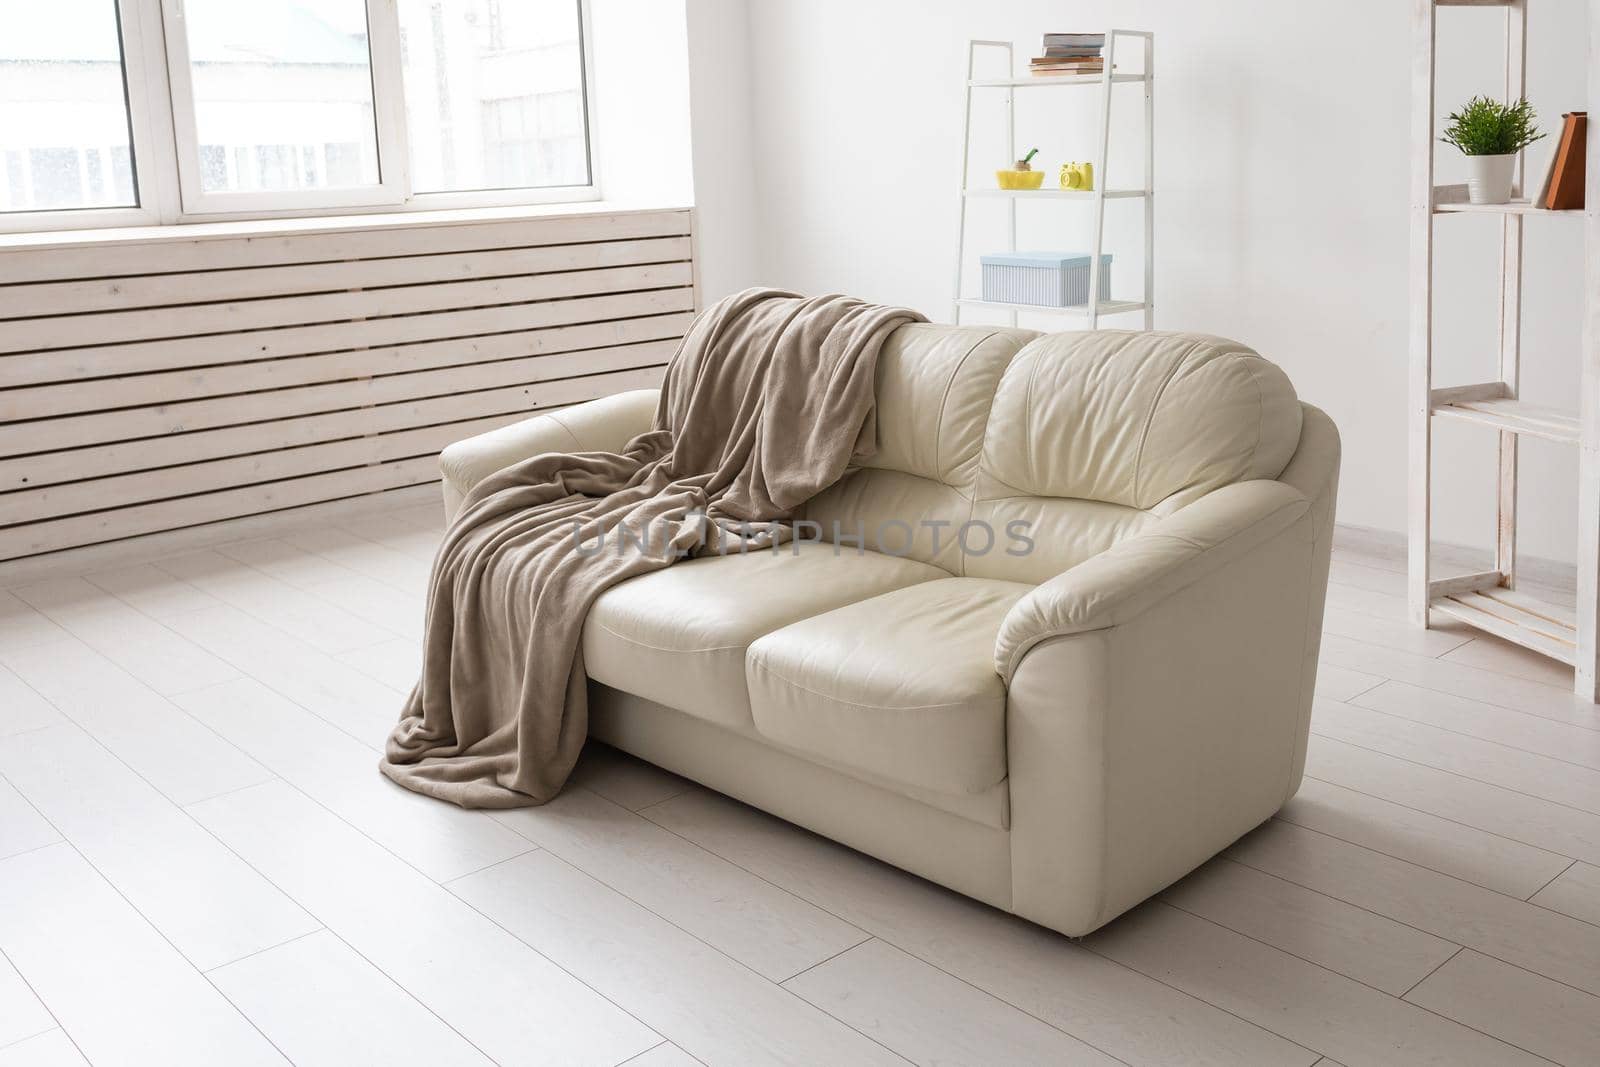 Beige sofa against white empty wall in simple living room interior. Minimalism concept